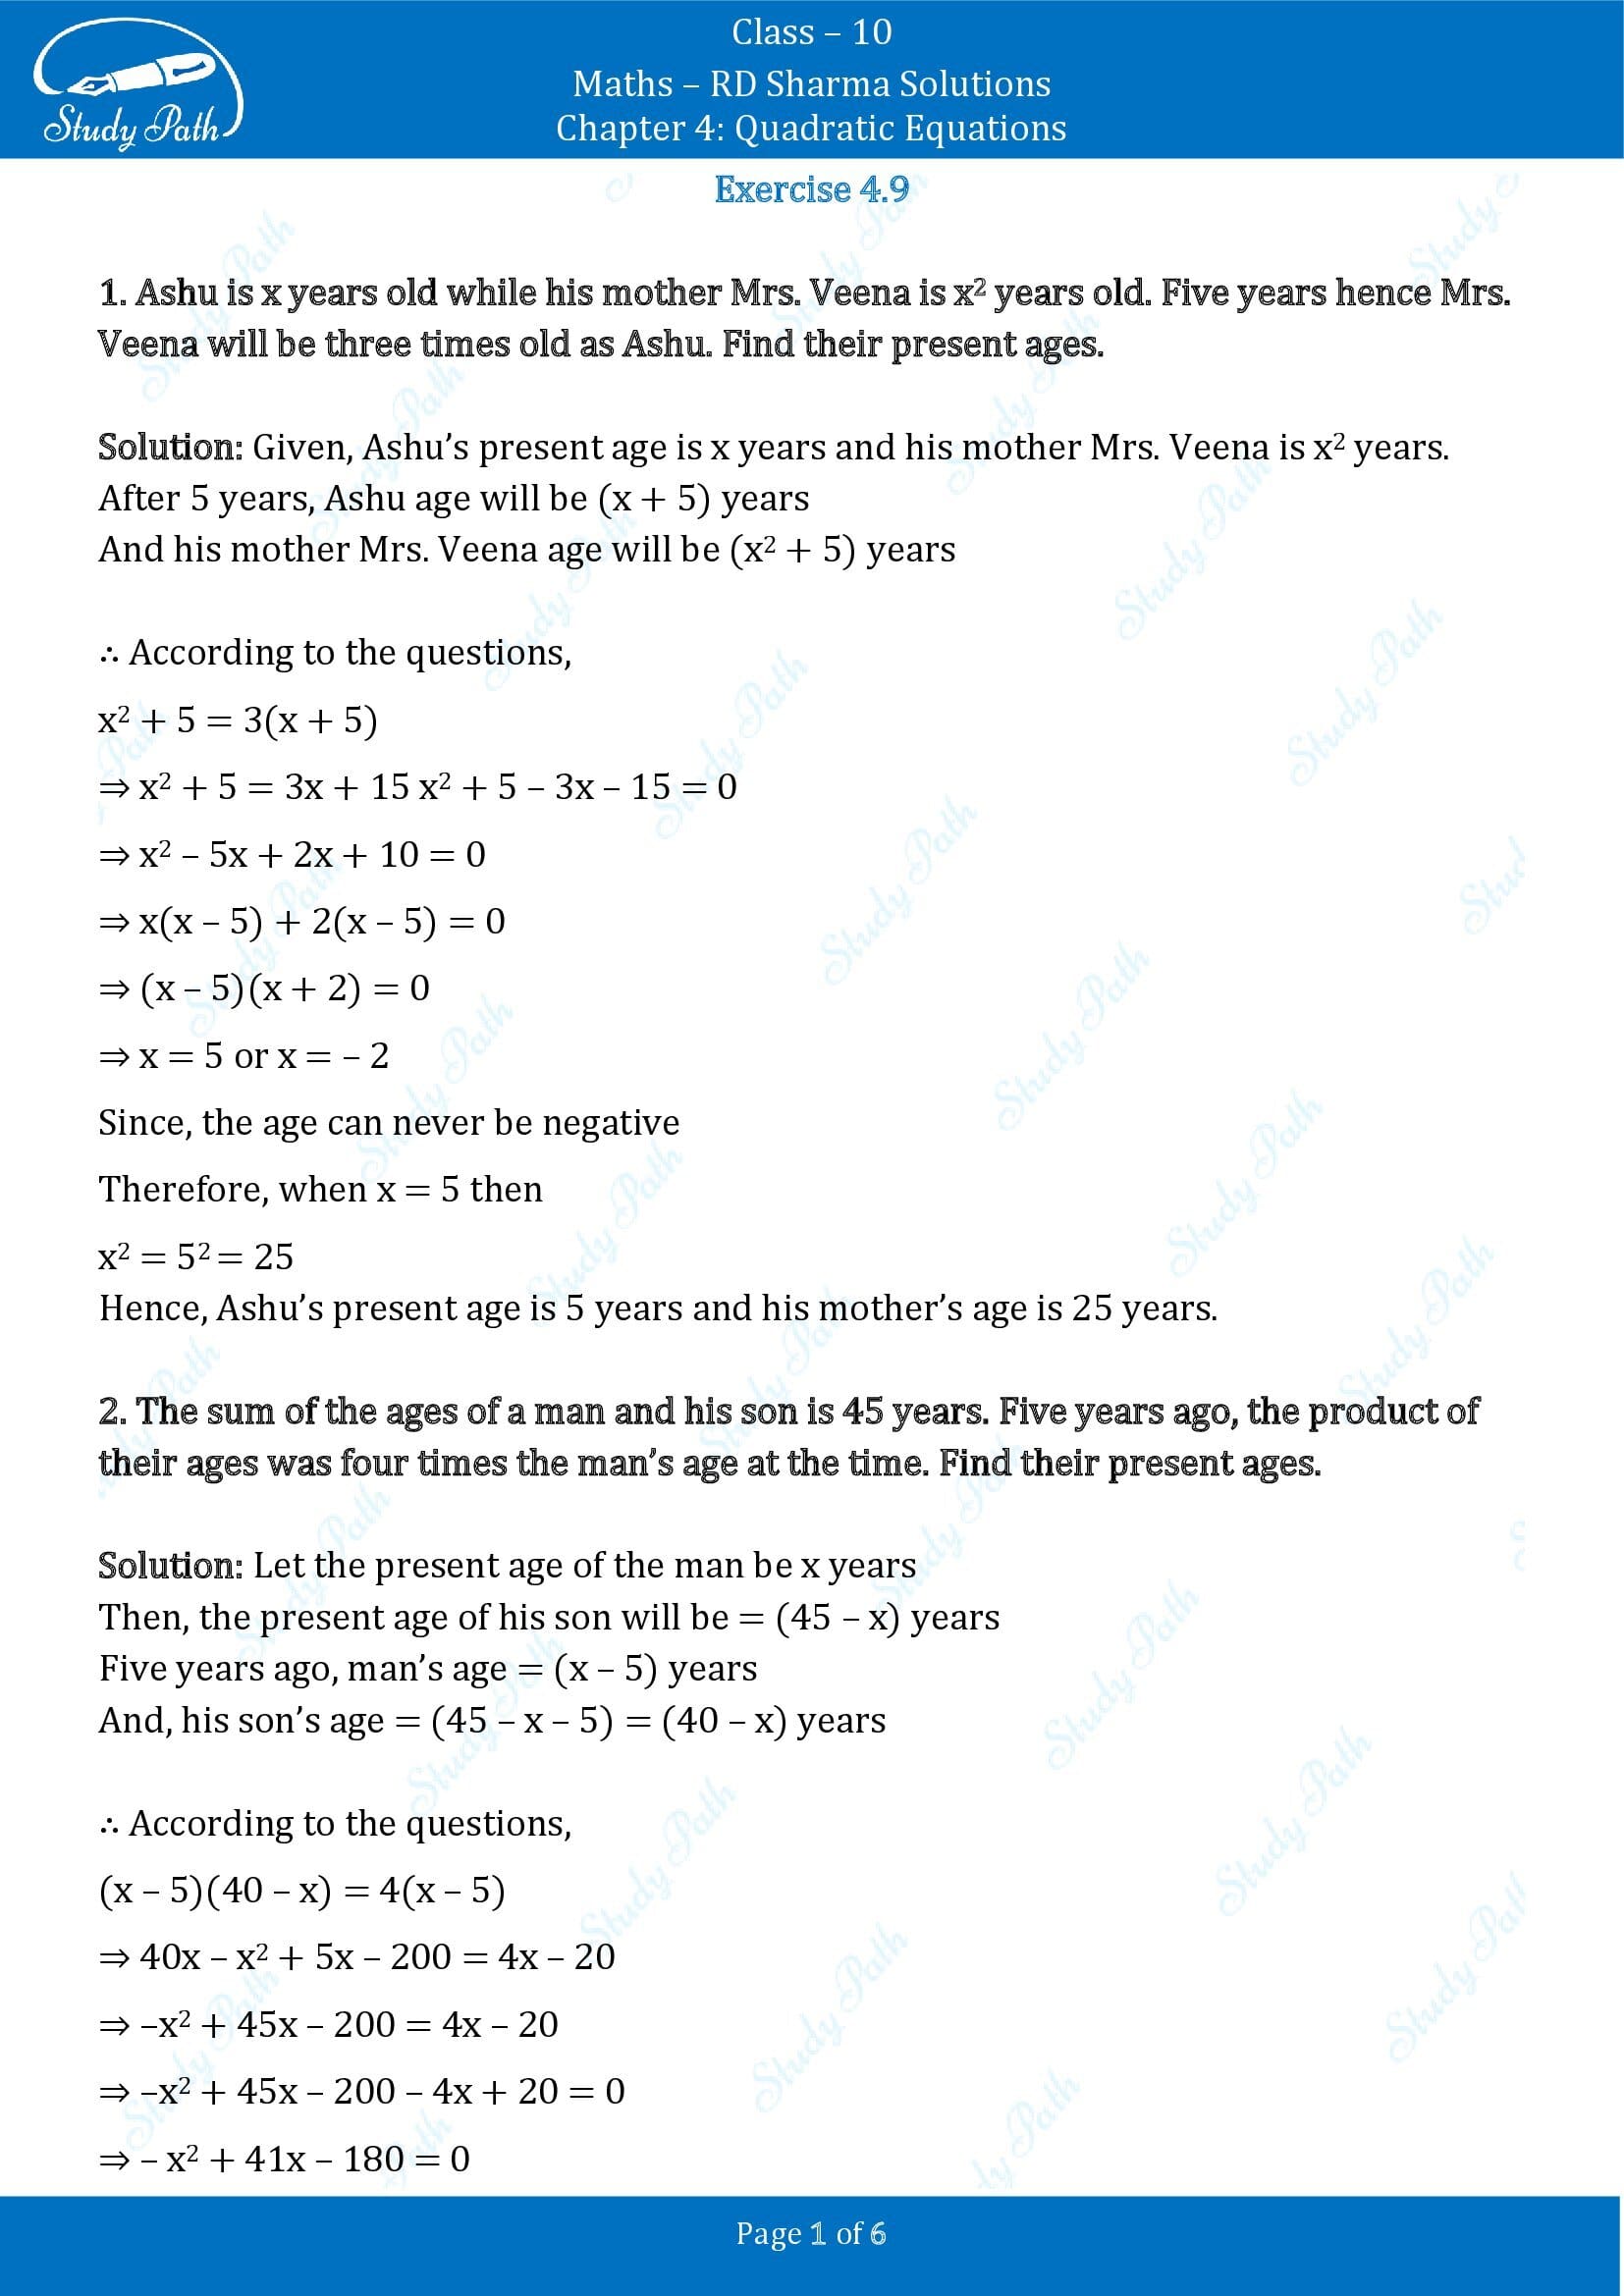 RD Sharma Solutions Class 10 Chapter 4 Quadratic Equations Exercise 4.9 00001